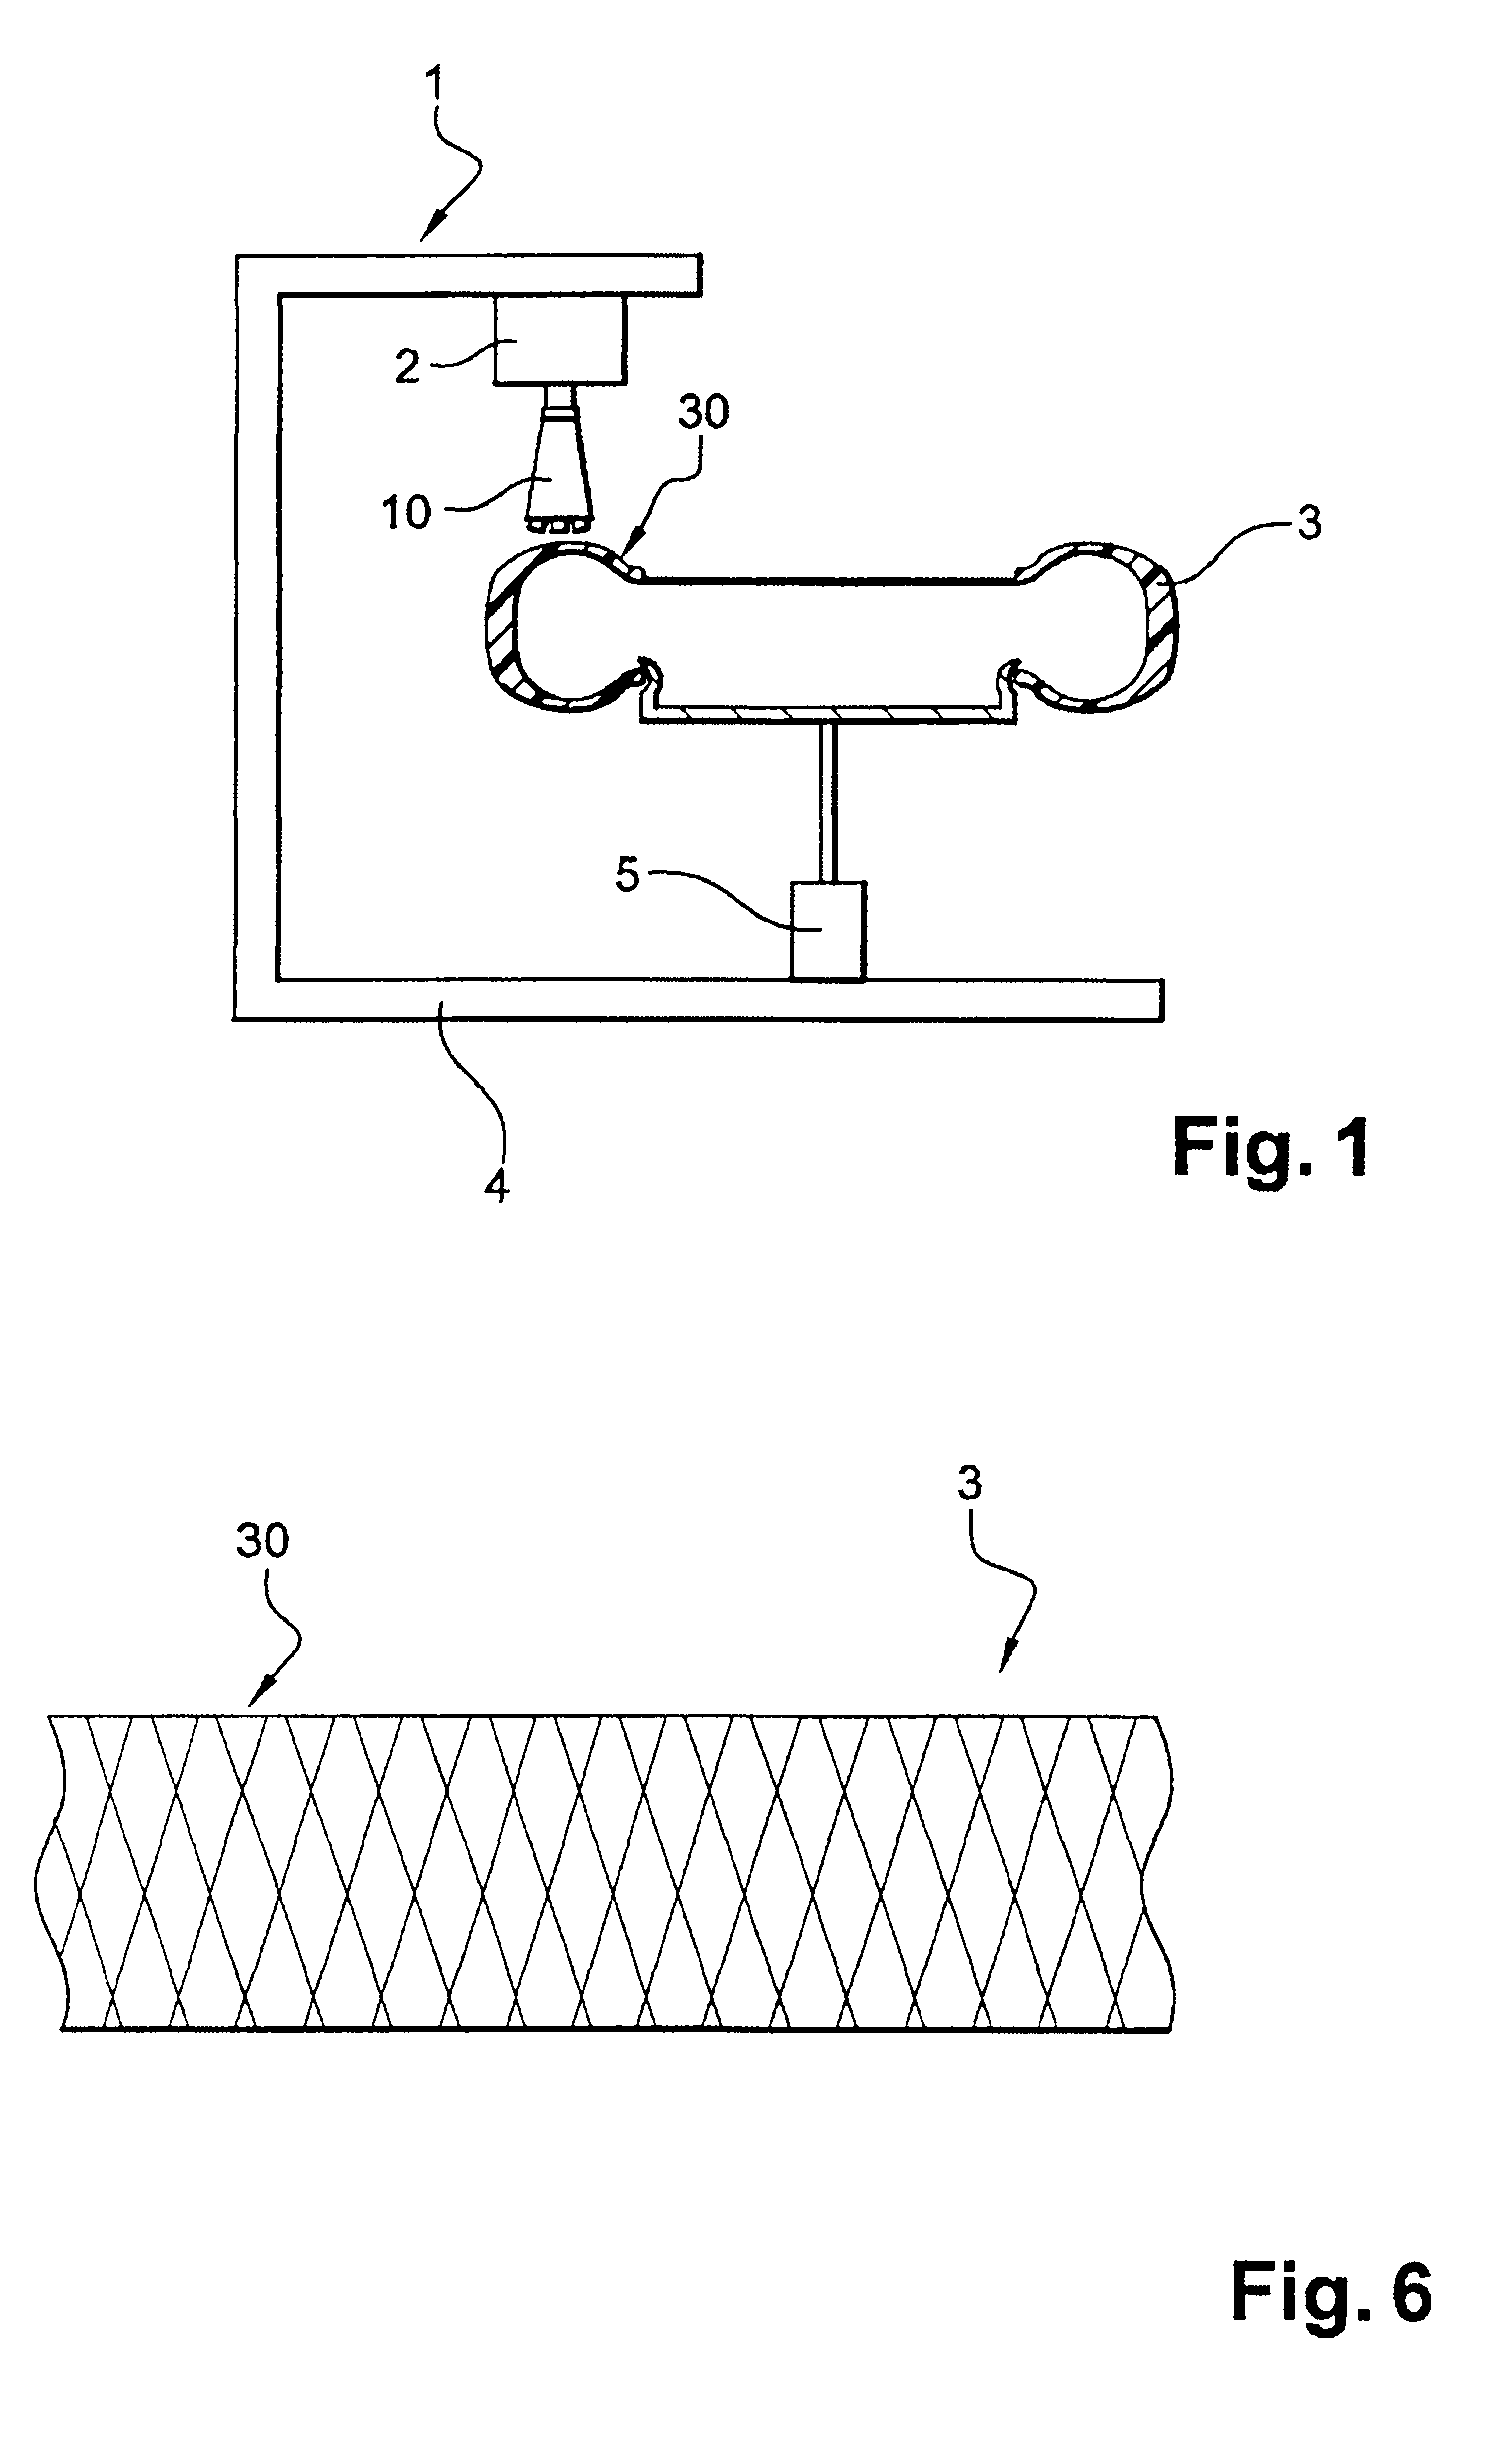 System for Recycling Used Tyres Comprising a High-Pressure Fluid Spray Head